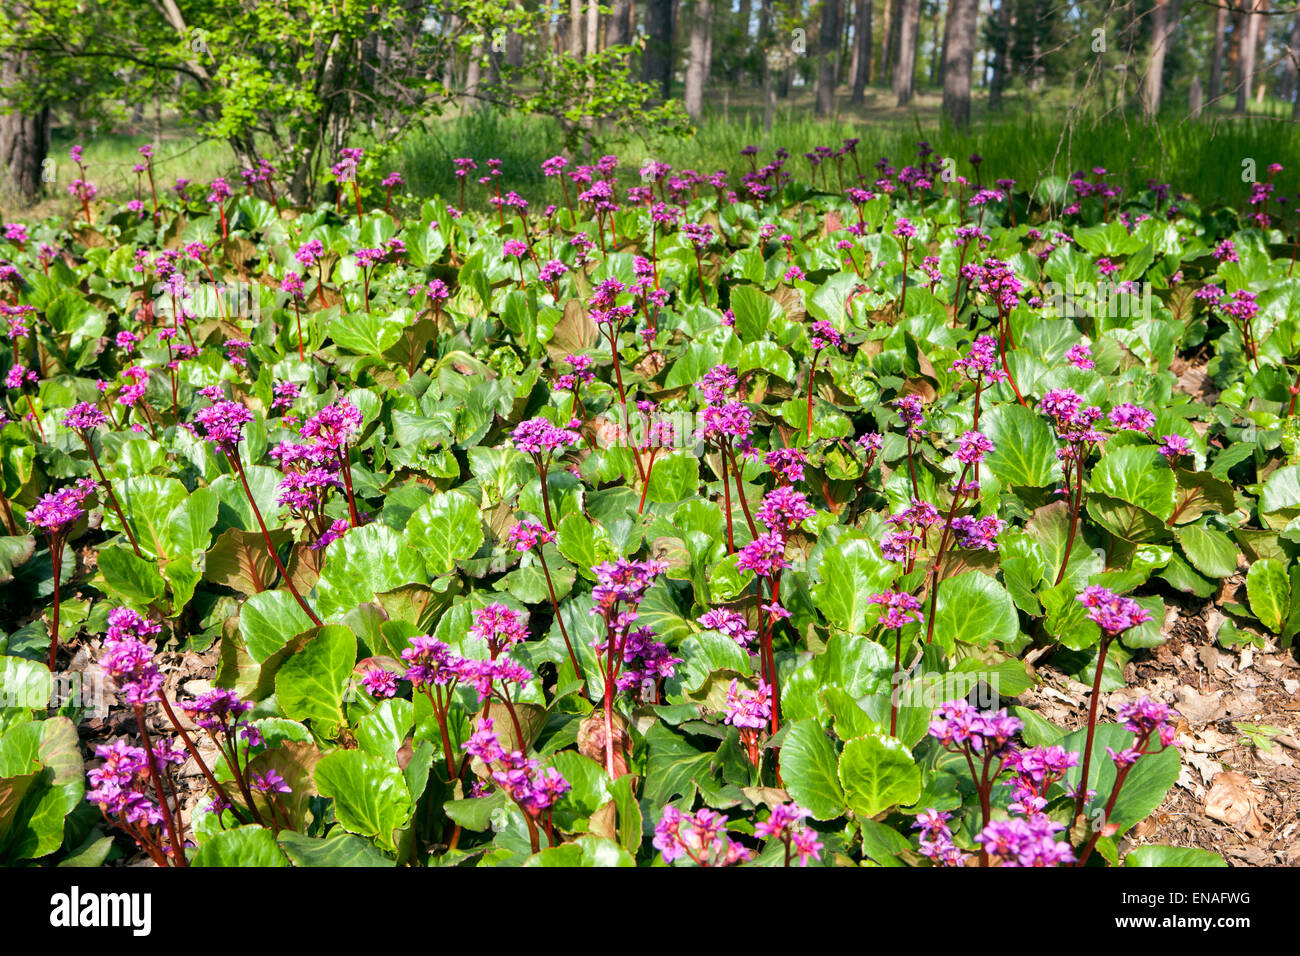 Bergenia cordifolia growing in a garden on the edge of a forest Stock Photo